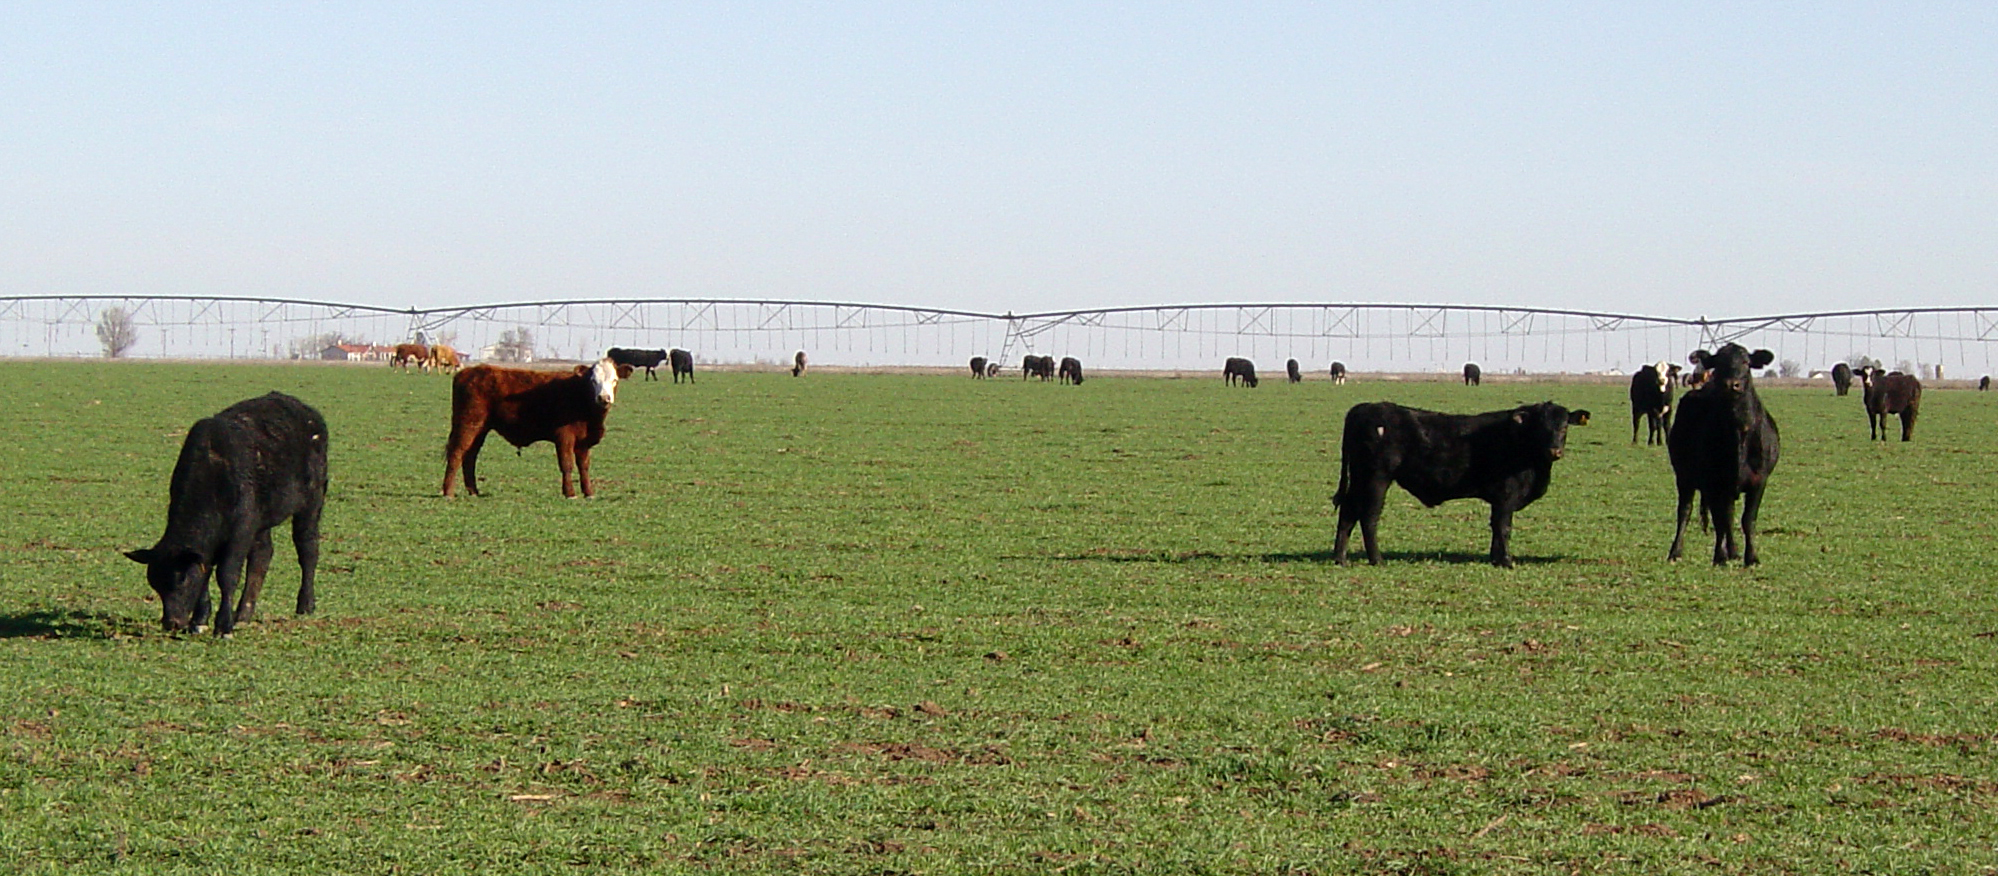 OSU Extension Livestock Economist Dr. Derrell Peel Says Conditions Exist For Good Profit Margins For Grazing Stocker Calves On Wheat Pasture This Year